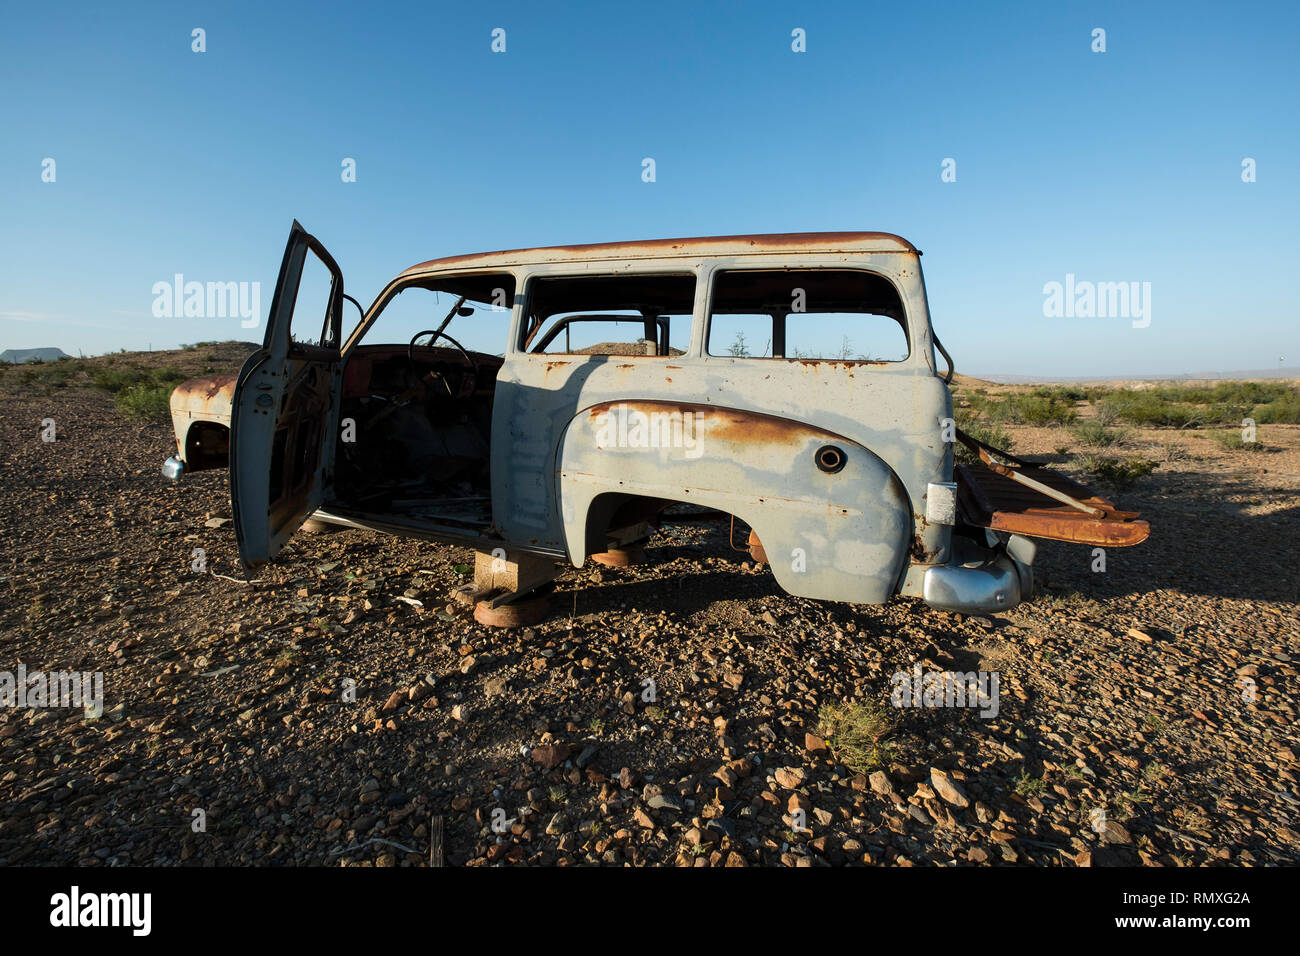 An old, rusty abandoned car in the desert of West Texas. Stock Photo